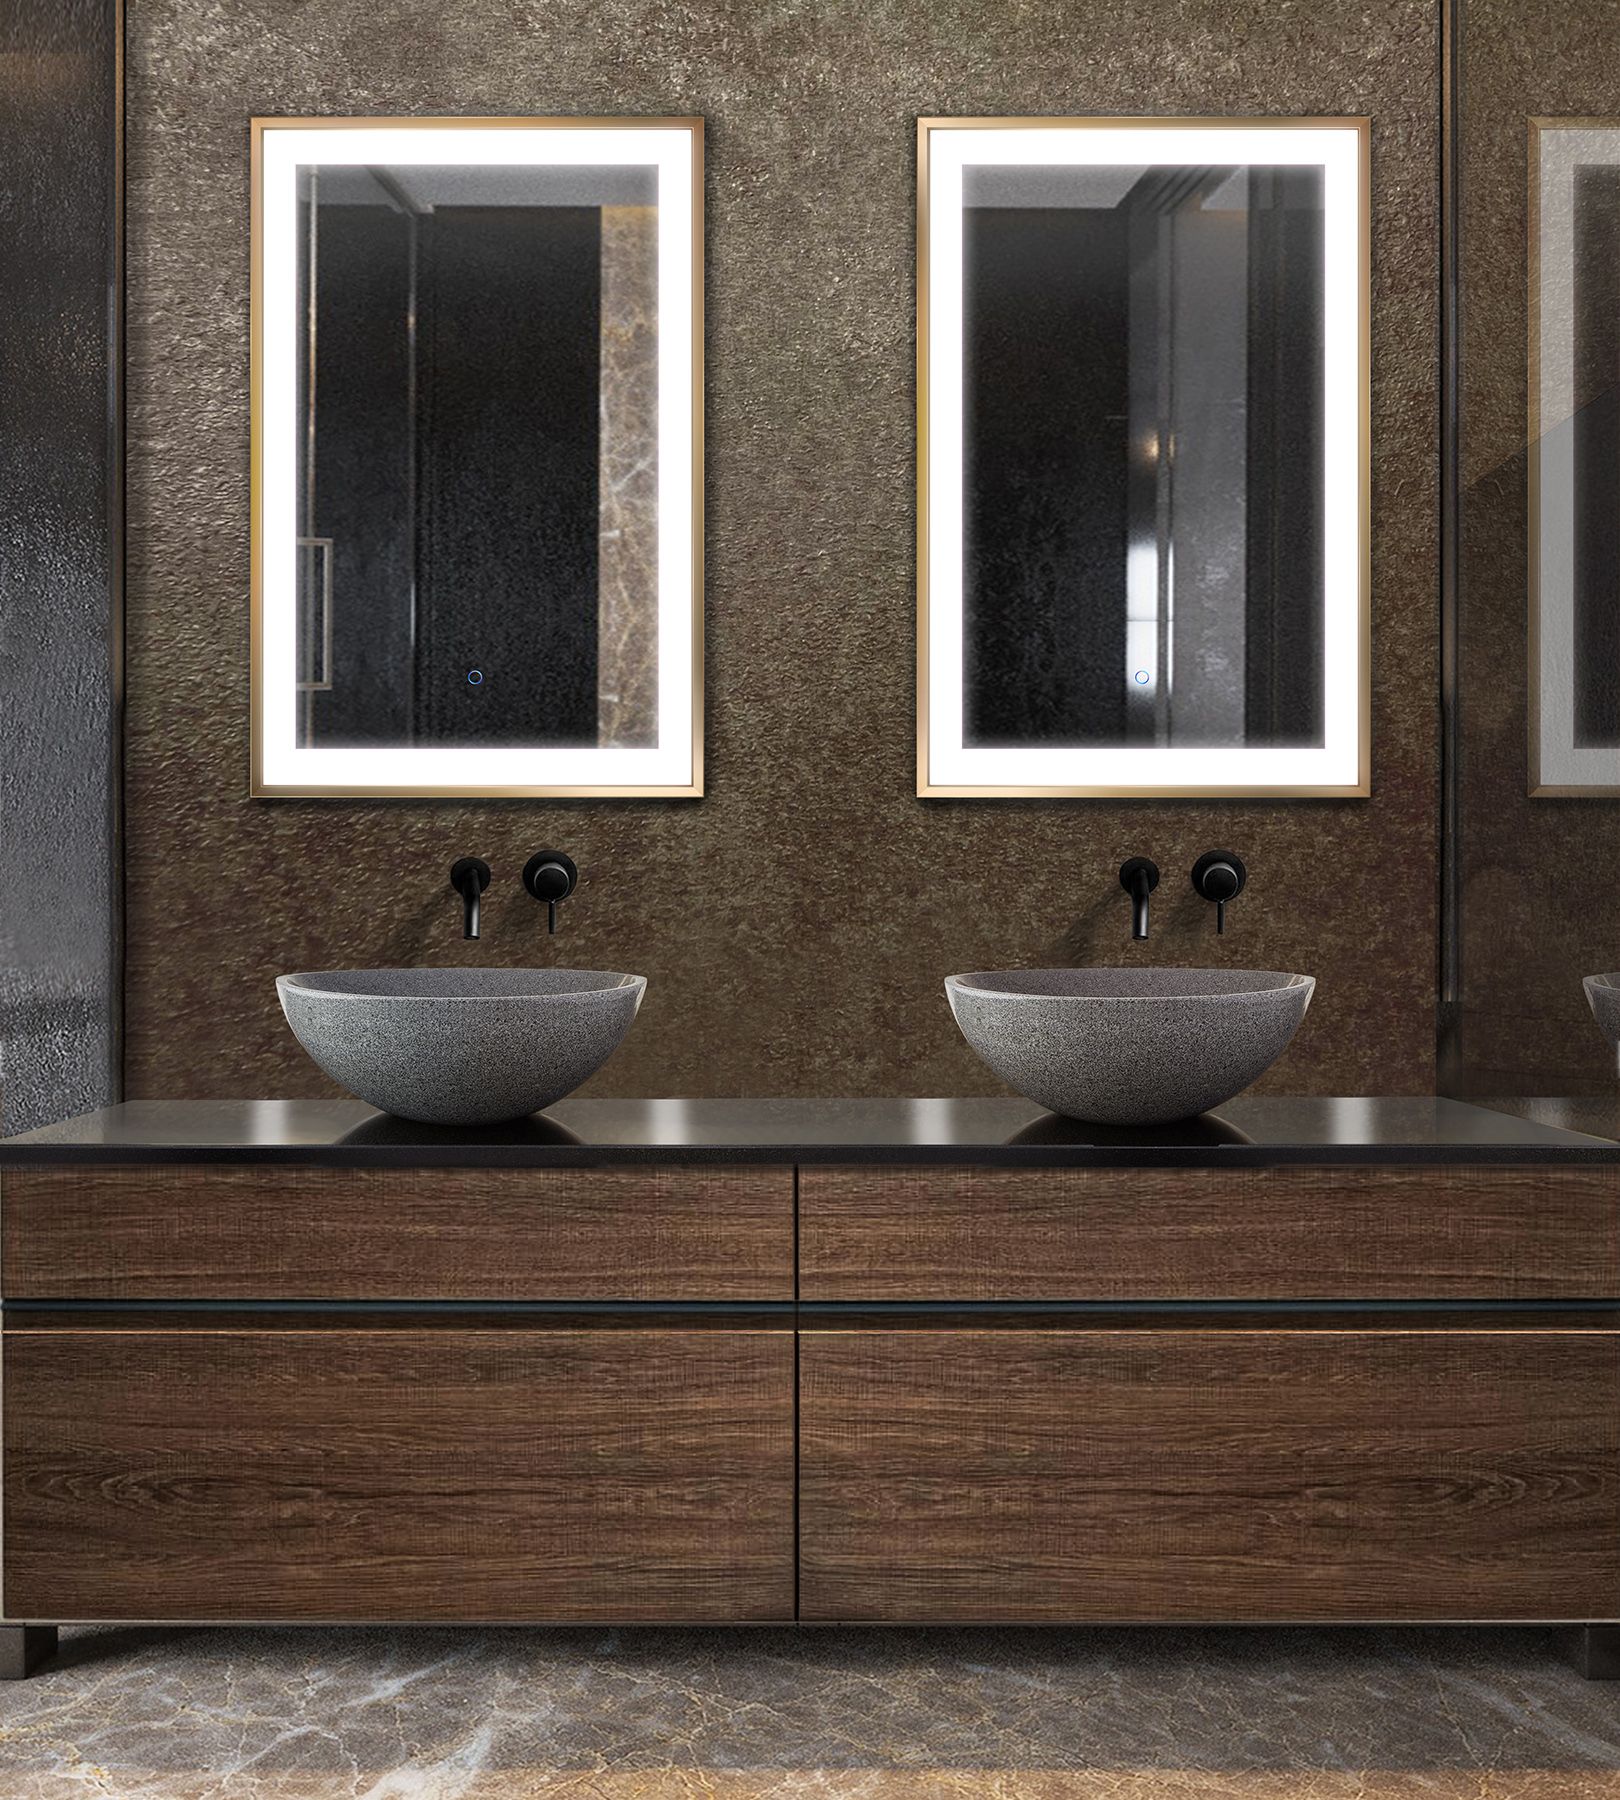 Krugg Soho Led Bathroom Mirror 24″ X 36″ Gold – Krugg Reflections Usa In Gold Led Wall Mirrors (View 8 of 15)